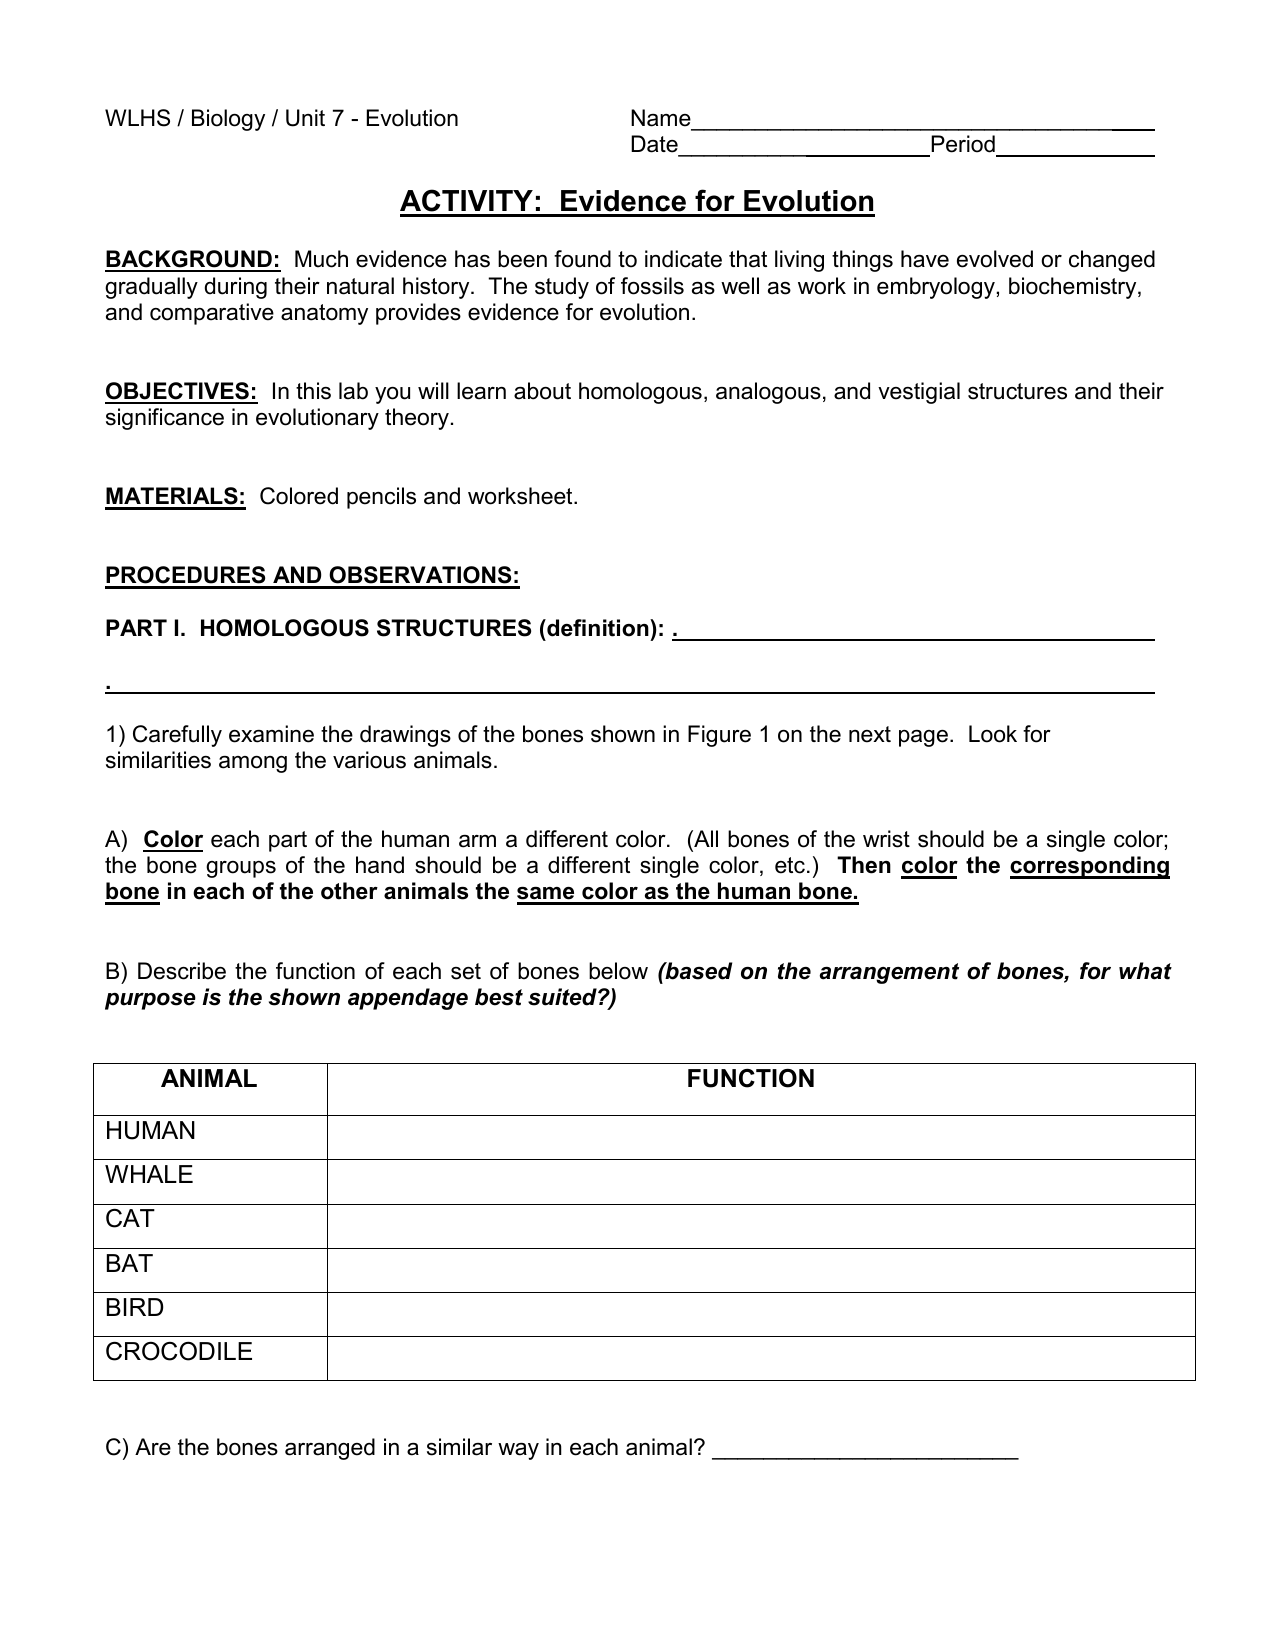 ACTIVITY: Evidence for Evolution With Regard To Evidence Of Evolution Worksheet